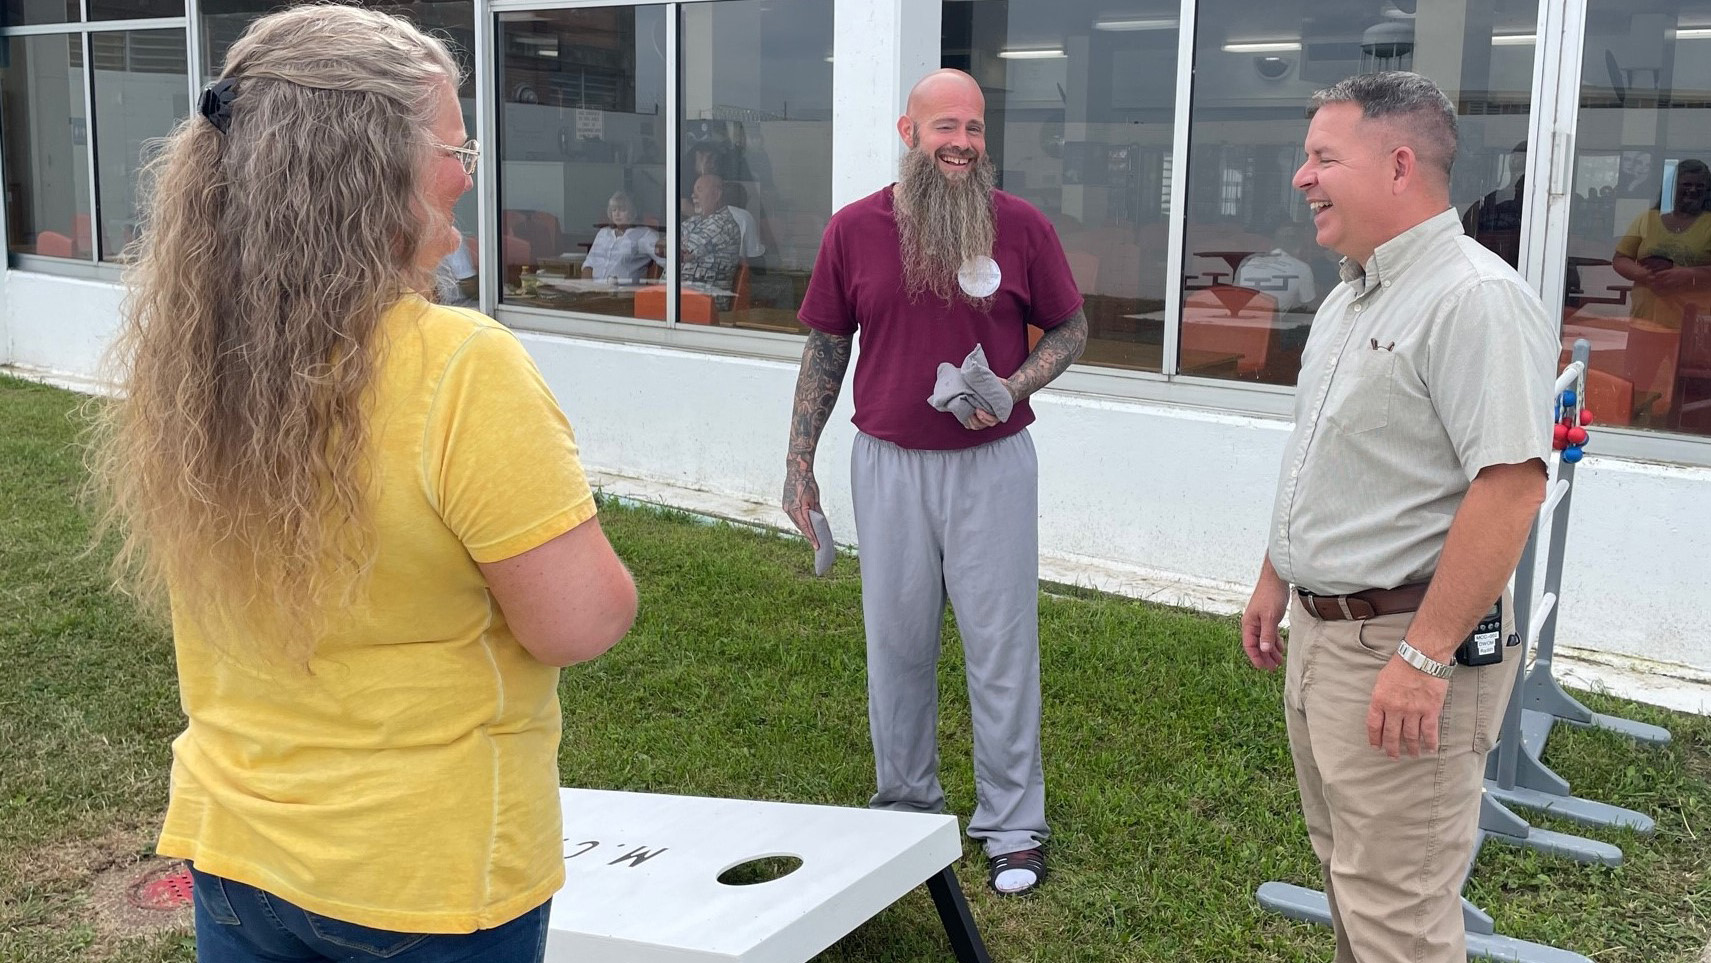 An offender at the Moberly Correctional Center plays lawn games with family members